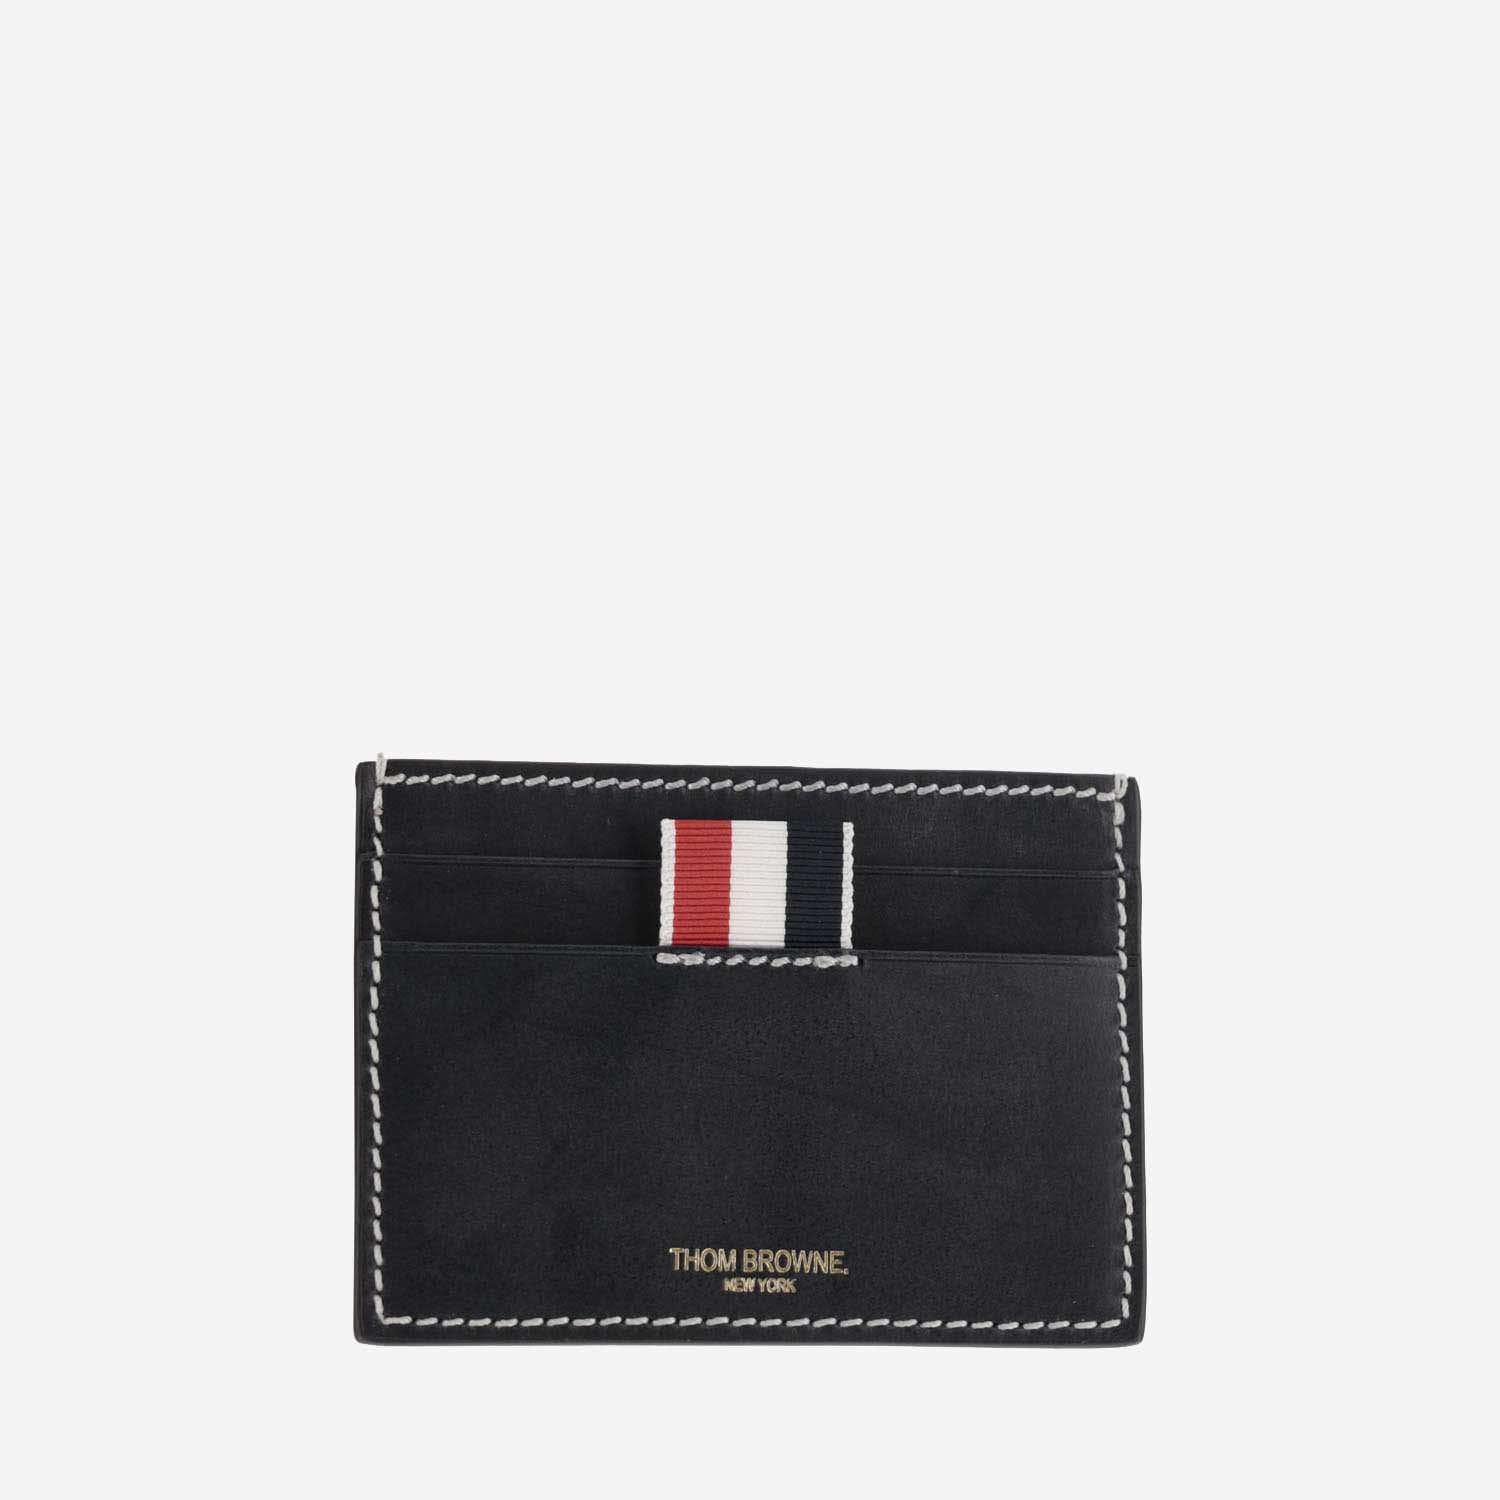 Thom Browne Leather Card Case